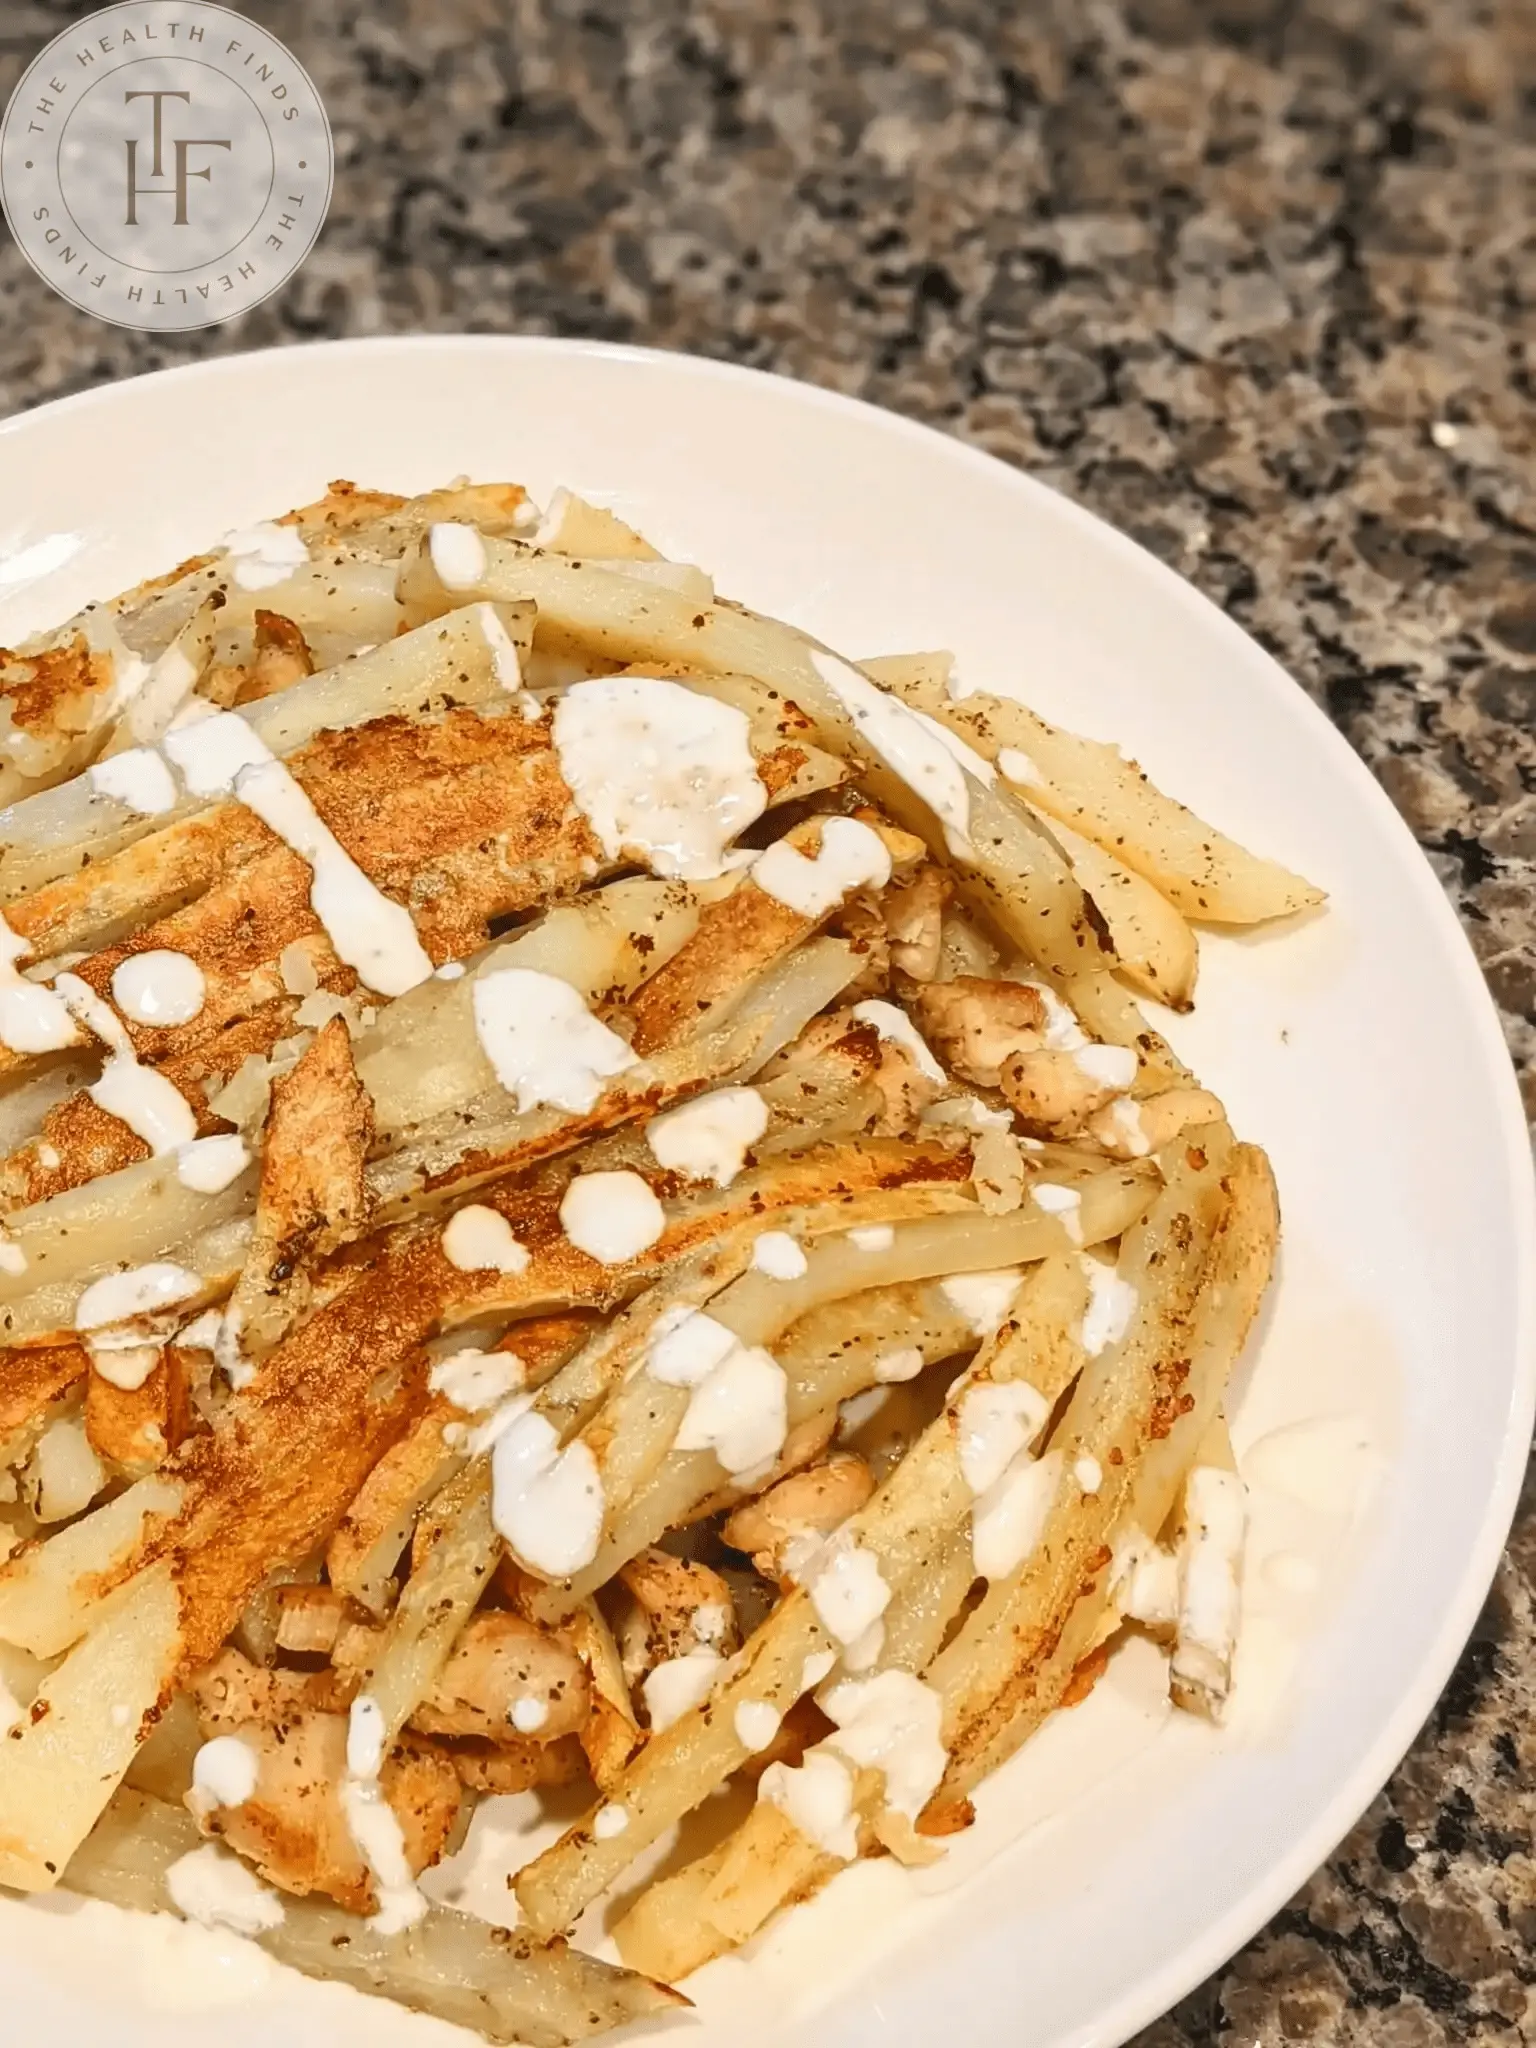 Chicken and fries dribbled with white garlic sauce